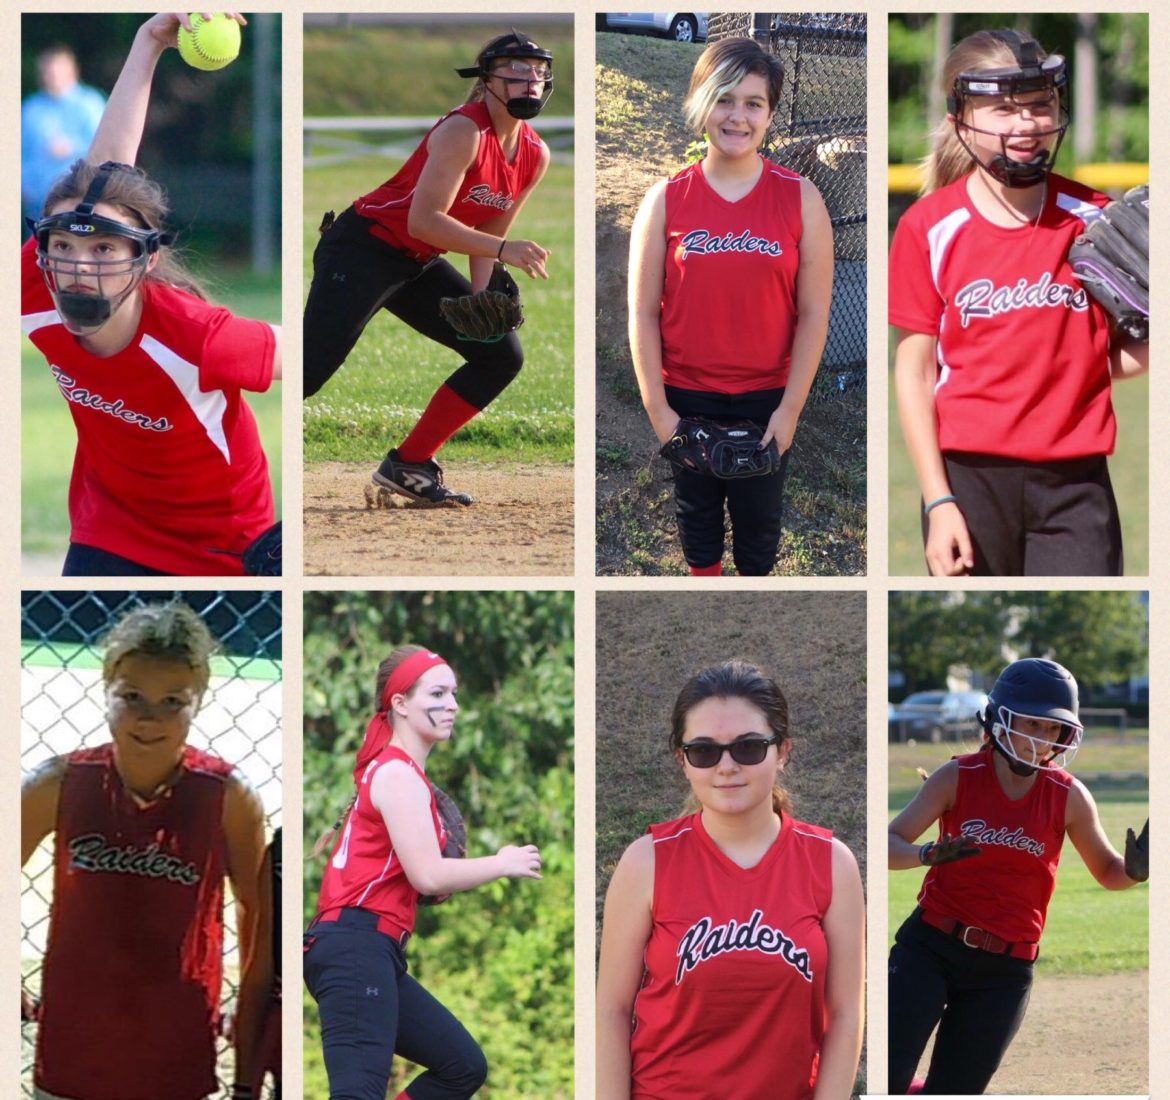 Eight members of the Watertown Youth Softball program will play in the Middle Essex All-Star games.